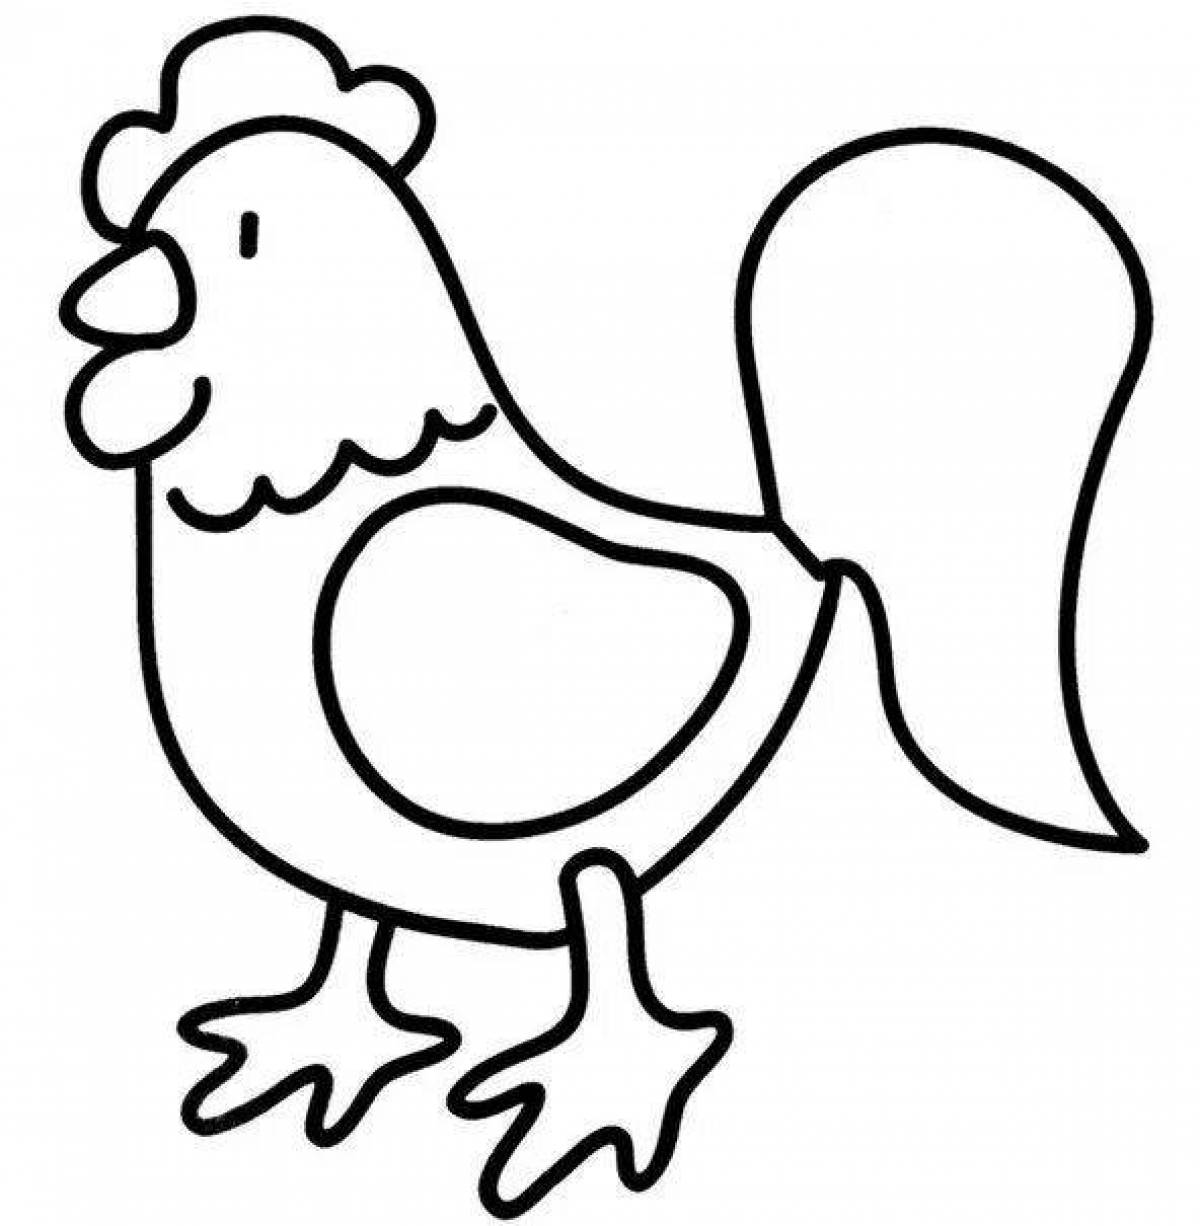 Children's rooster coloring book